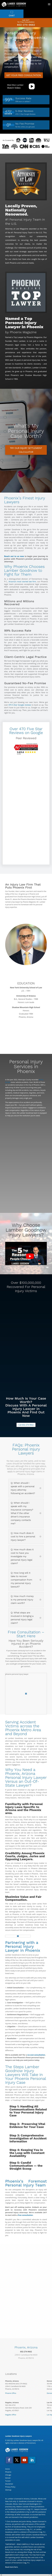 The Lamber-Goodnow Injury Law Team at Fennemore Craig, P.C. - Denver CO Lawyers